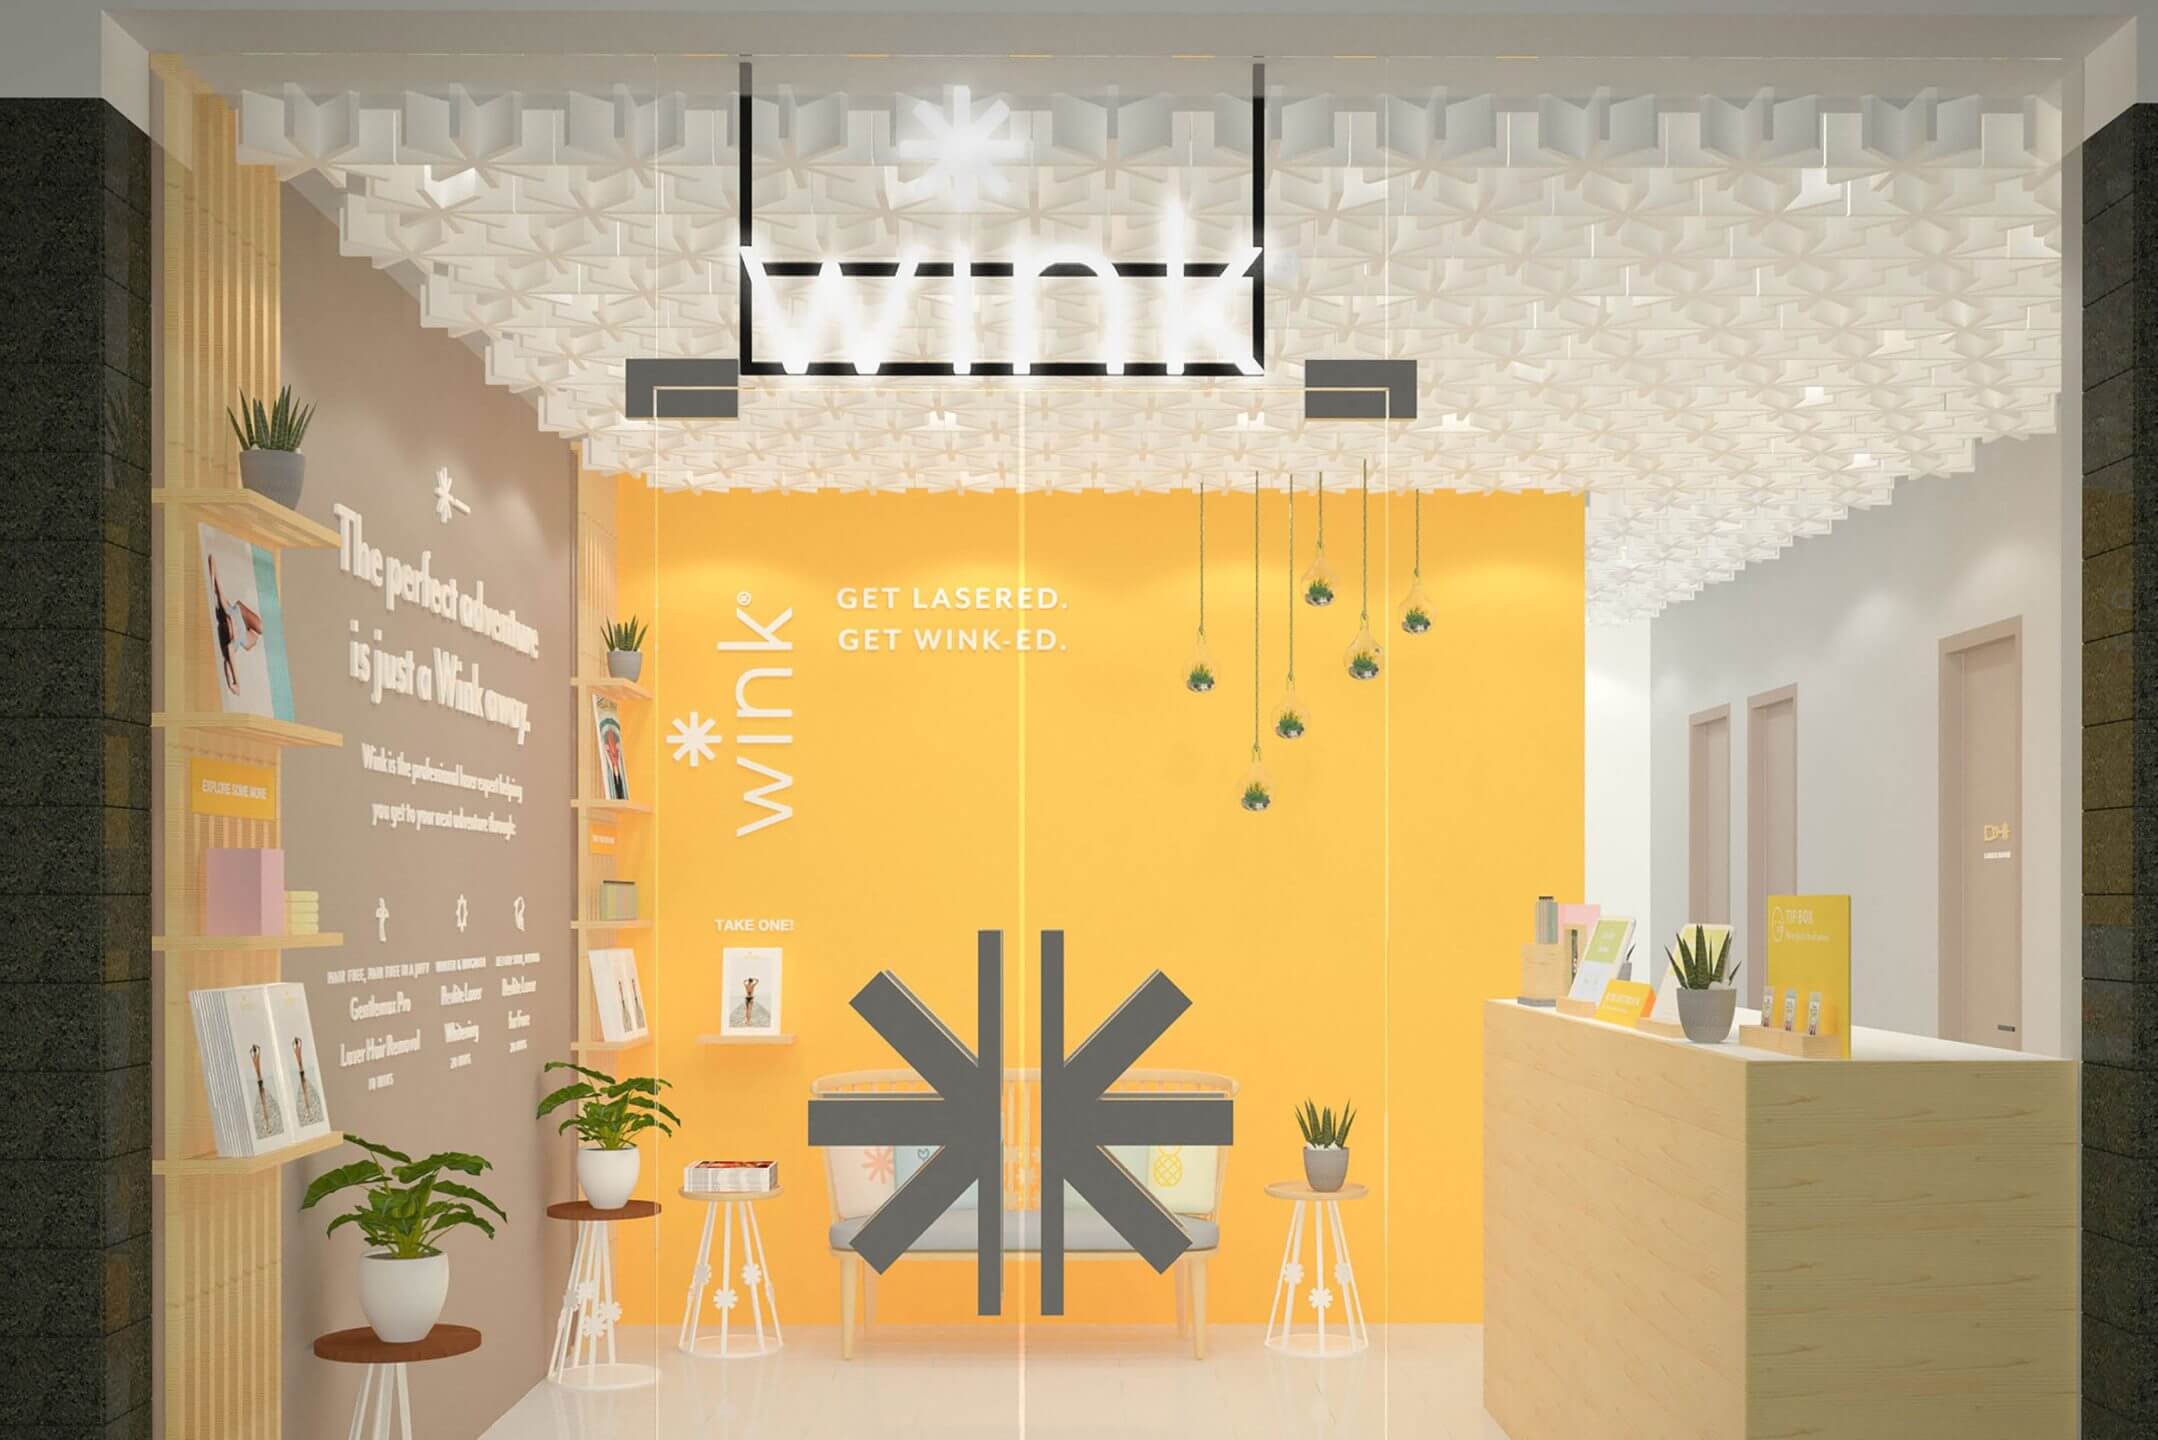 Store facade and environment design for beauty service brand Wink Laser Studio